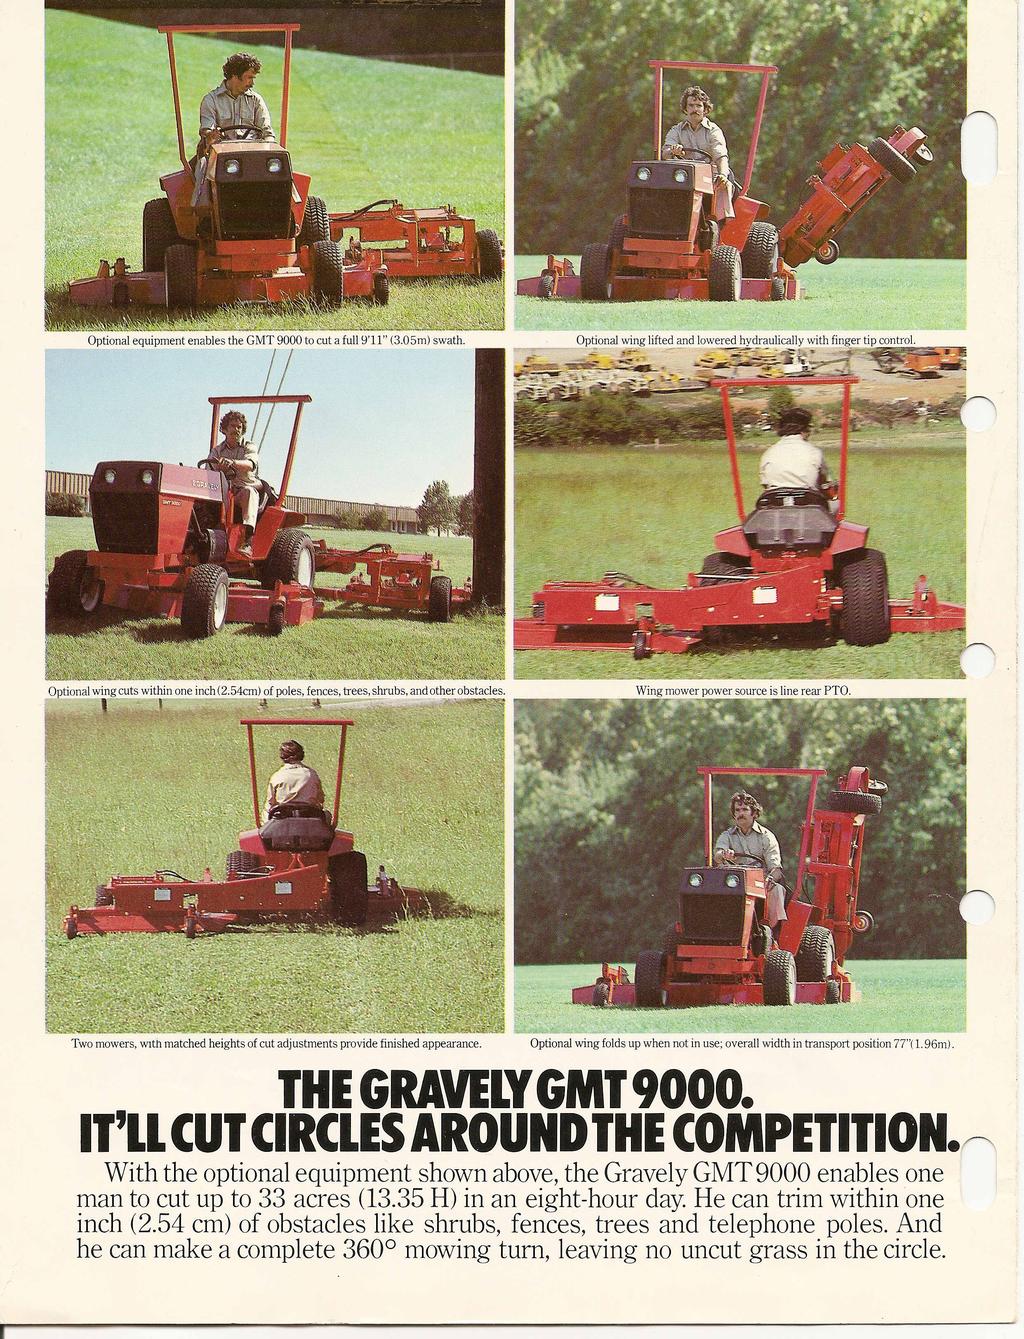 THE GRAVELY GMT'000. IT'll CUT CIRCLESAROUND THE COMPETITION. With the optional equipment shown above, the Gravely GMT 9000 enables one man to cut up to 33 acres (13.